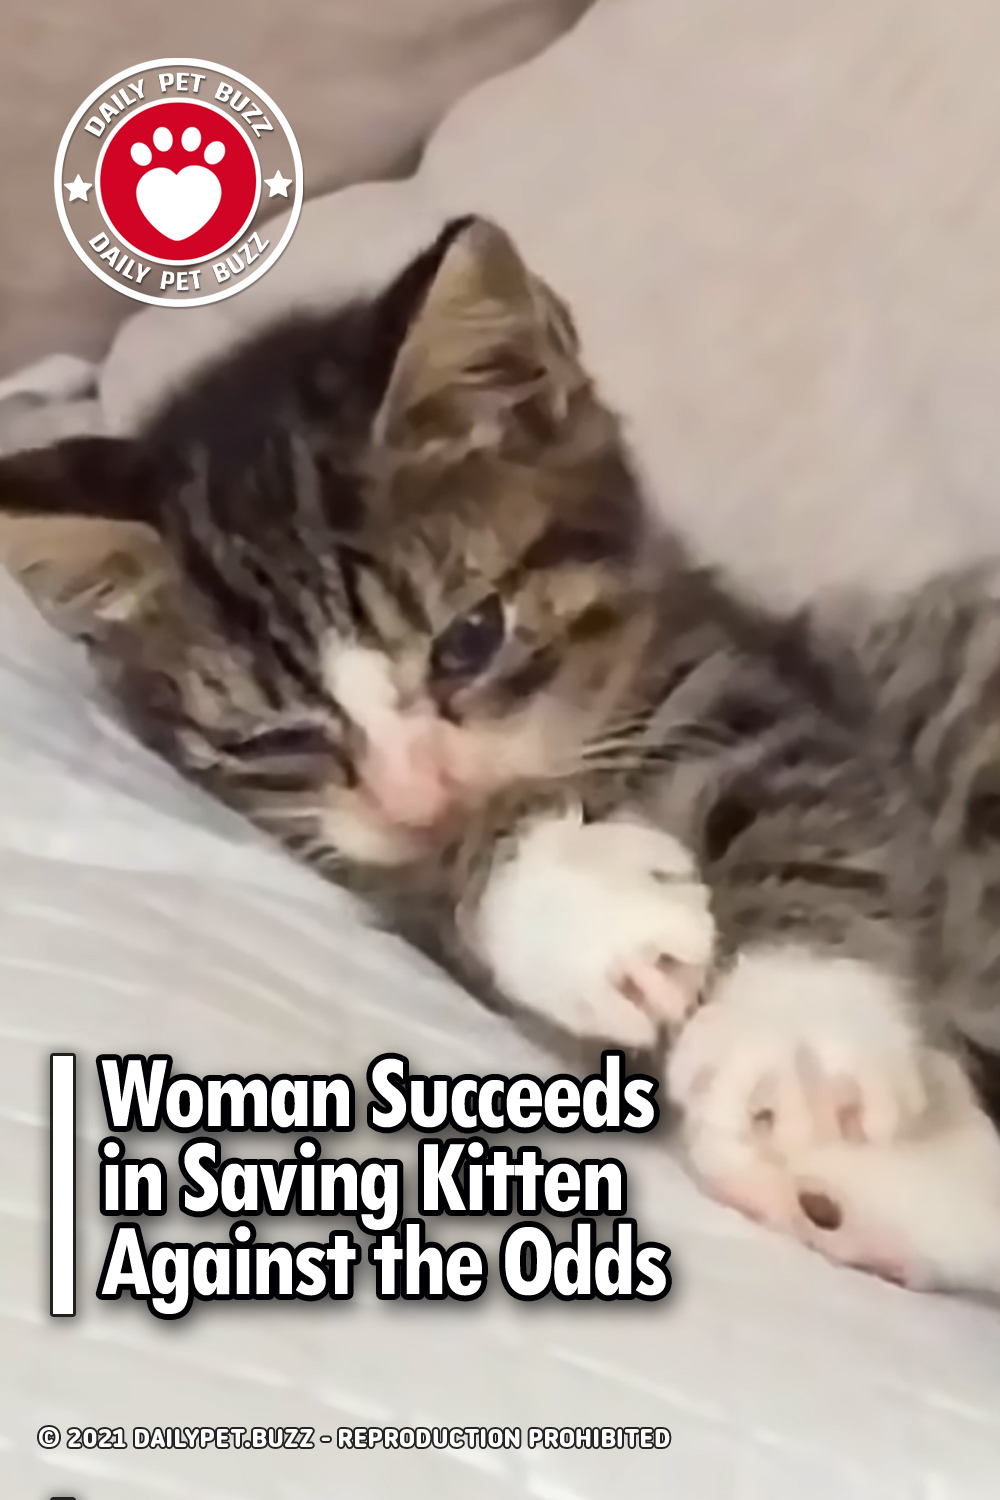 Woman Succeeds in Saving Kitten Against the Odds